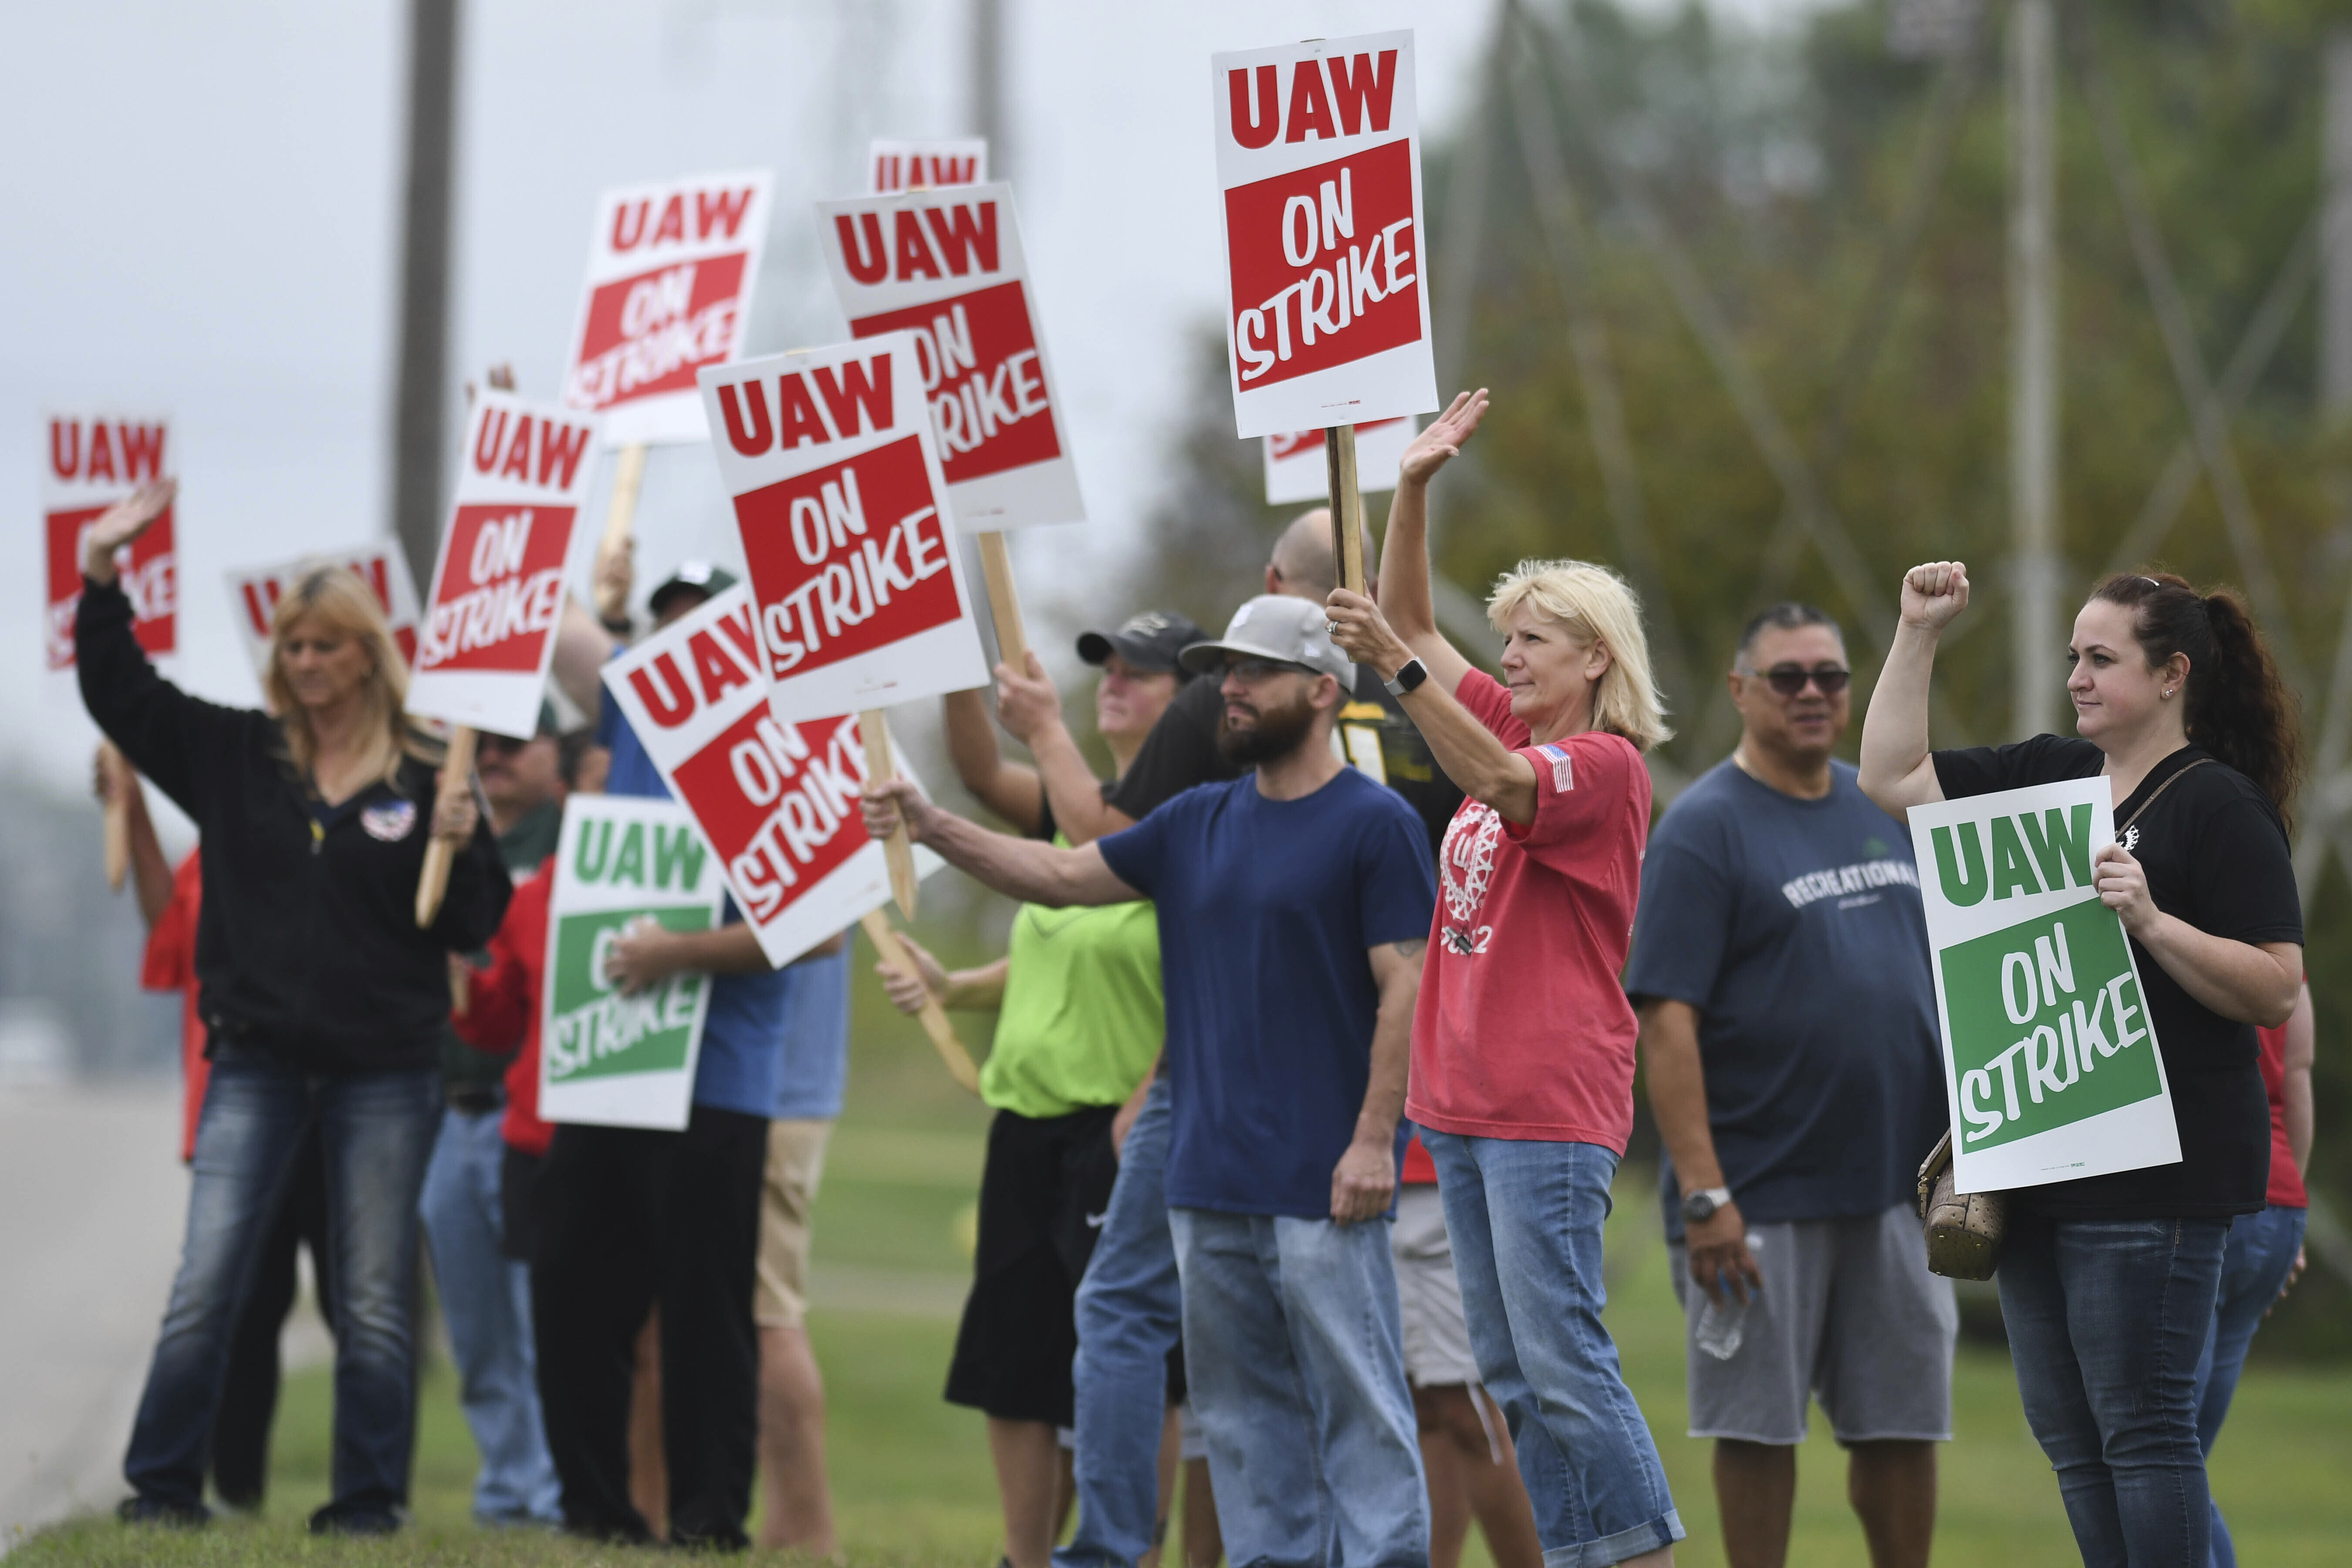 UAW strike puts Trump, GOP in political bind in key states The Daily